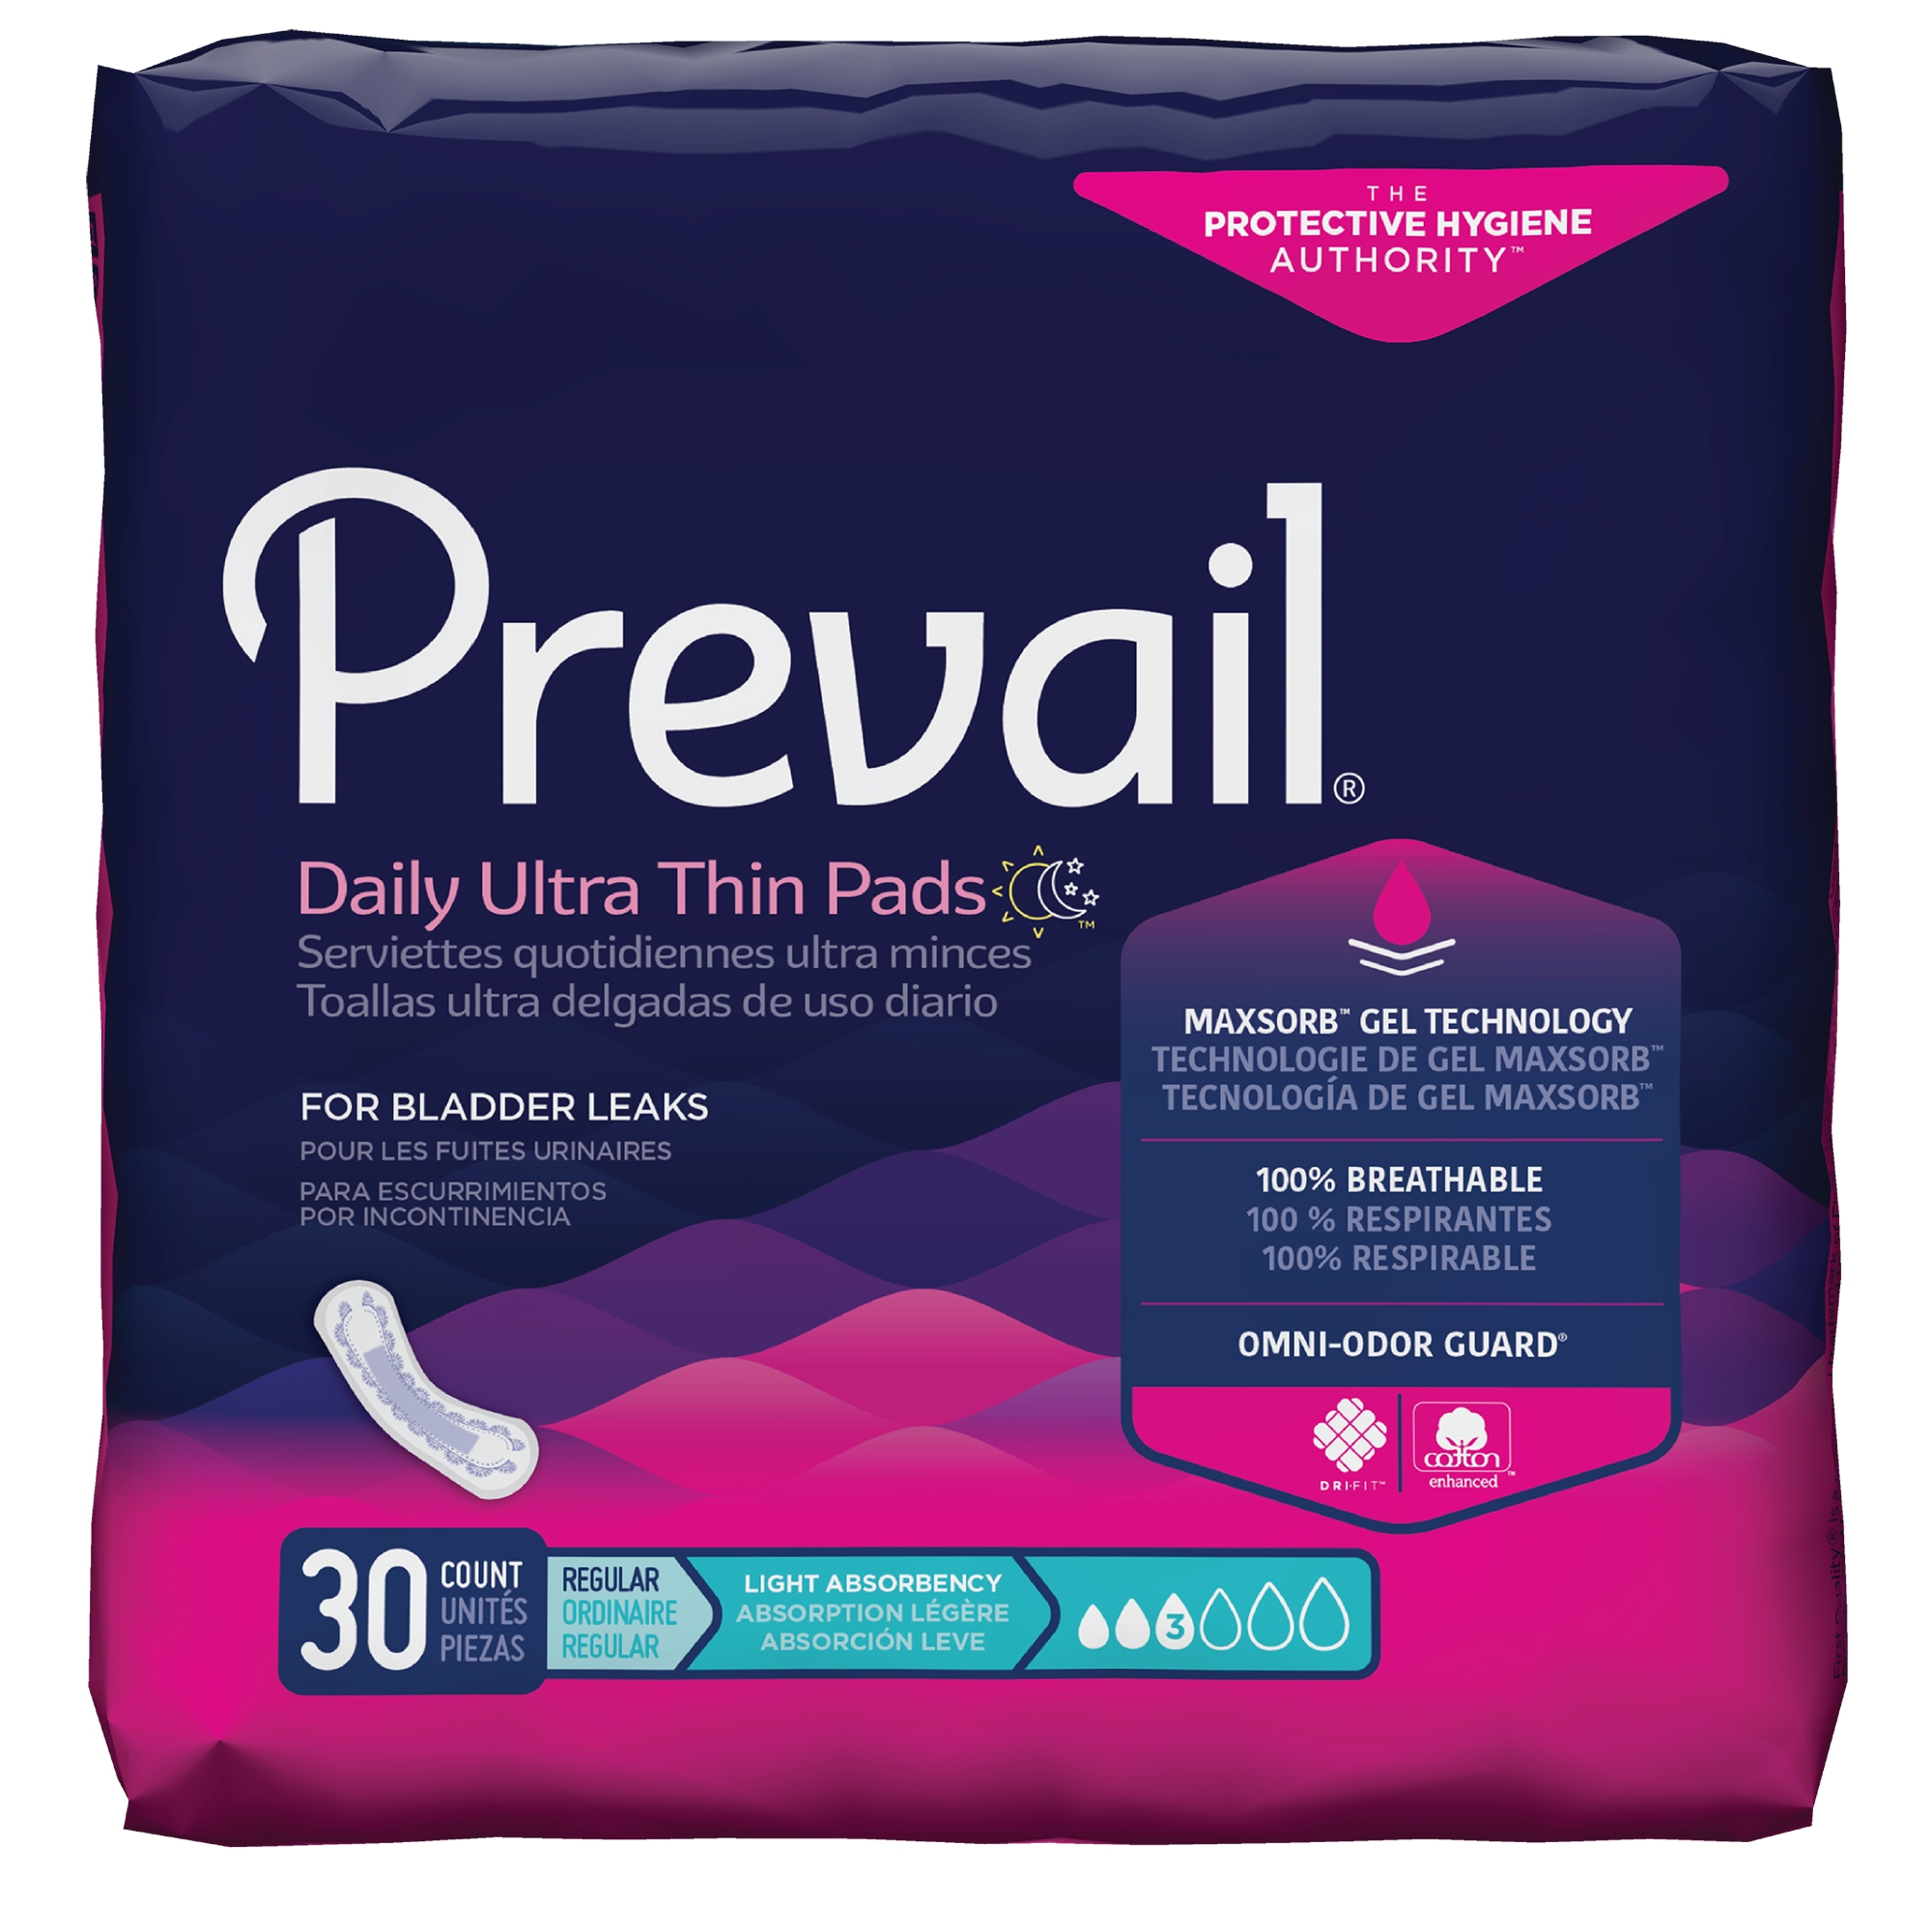 Prevail Daily Ultra Thin Bladder Control Pads